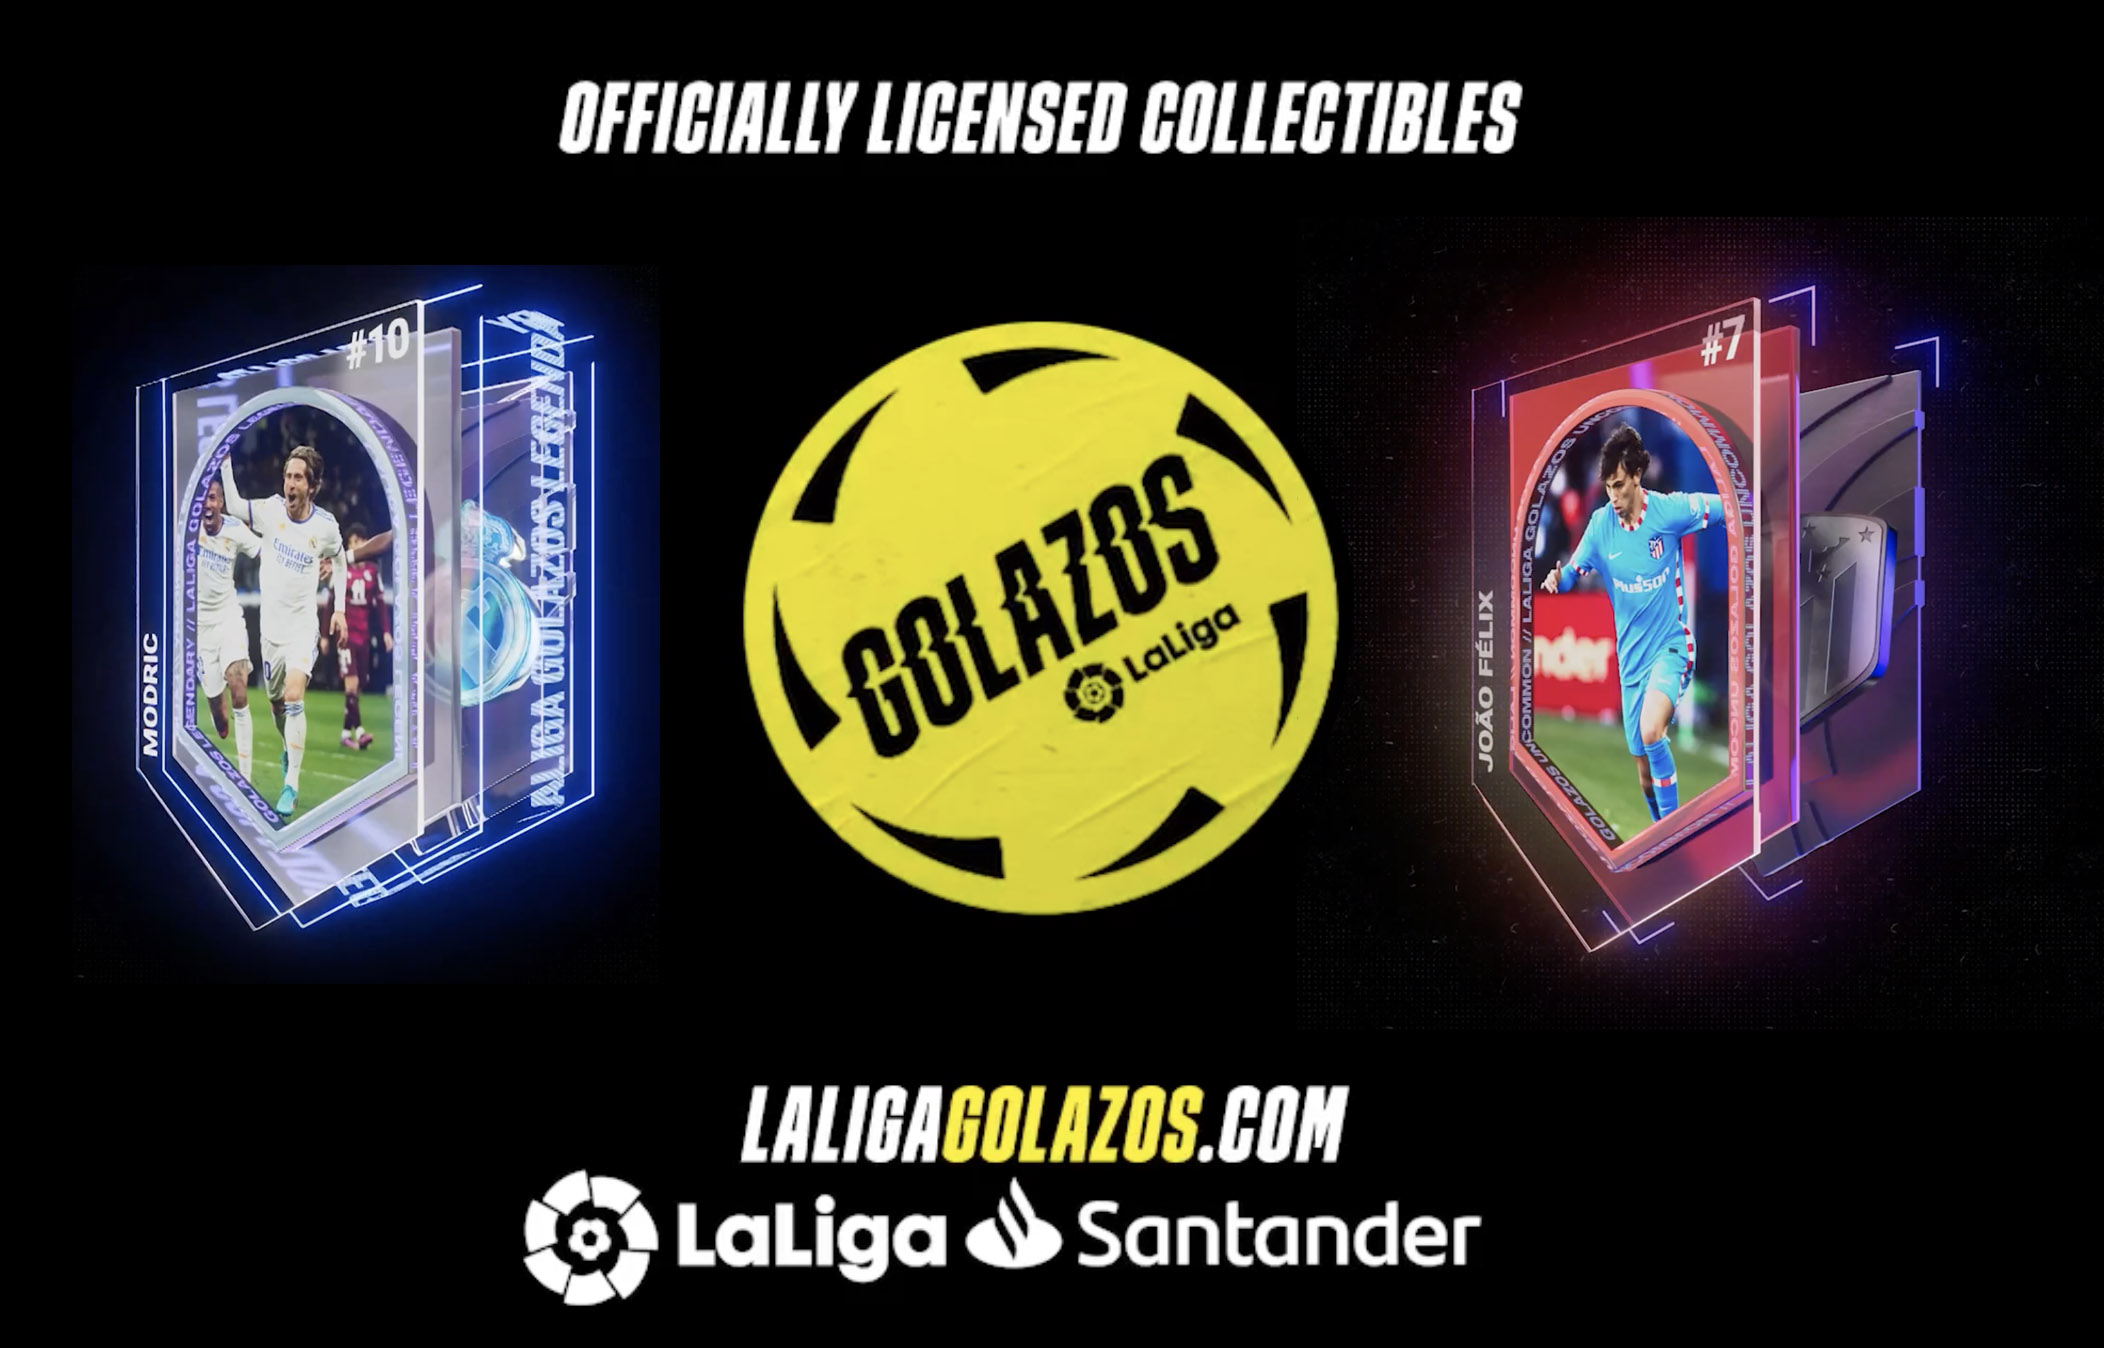 LaLiga Golazos – The new NFT platform launched by Dapper Labs